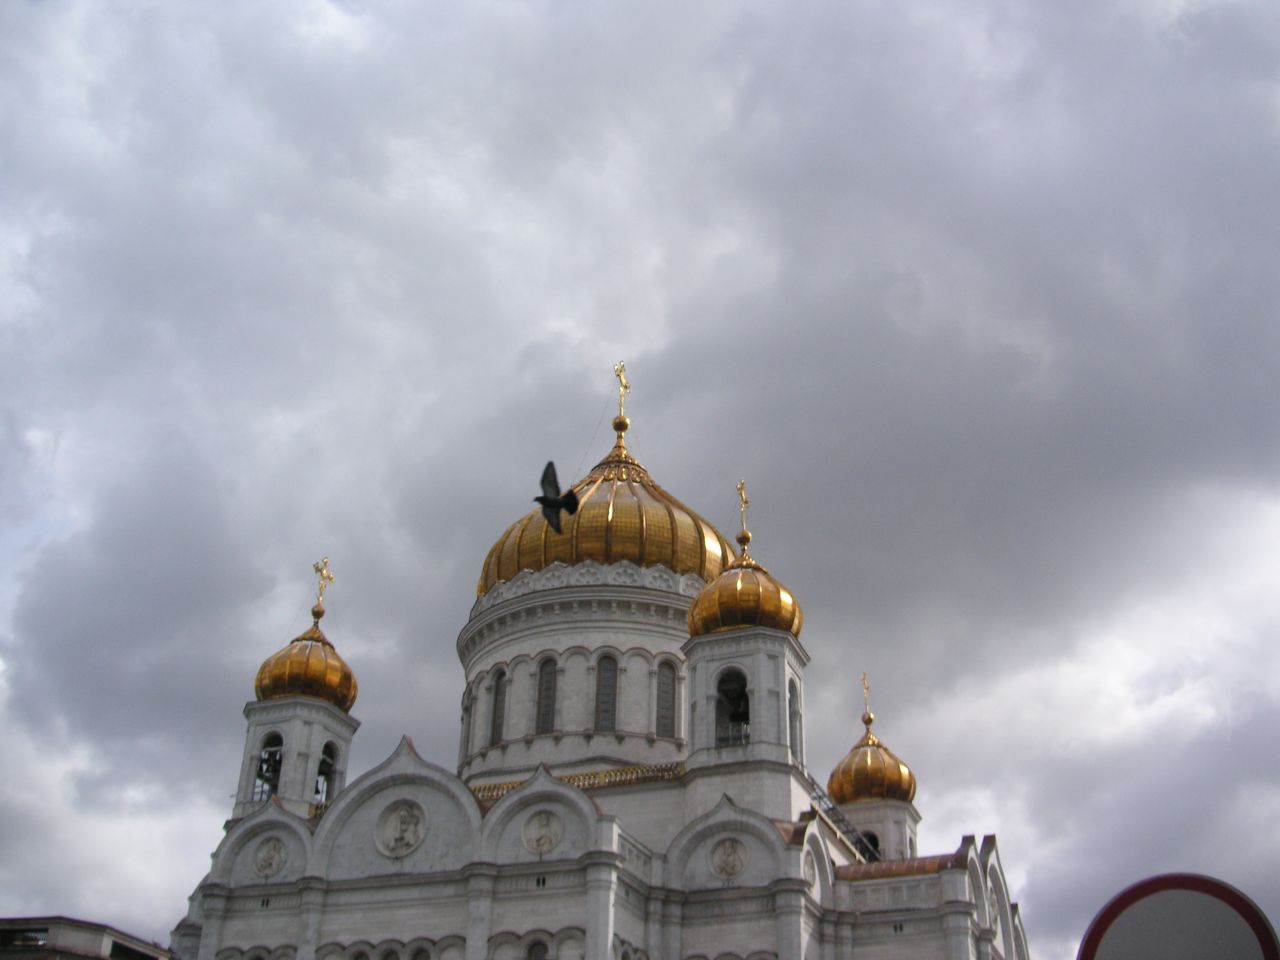 clouds gather over the top of the cathedral